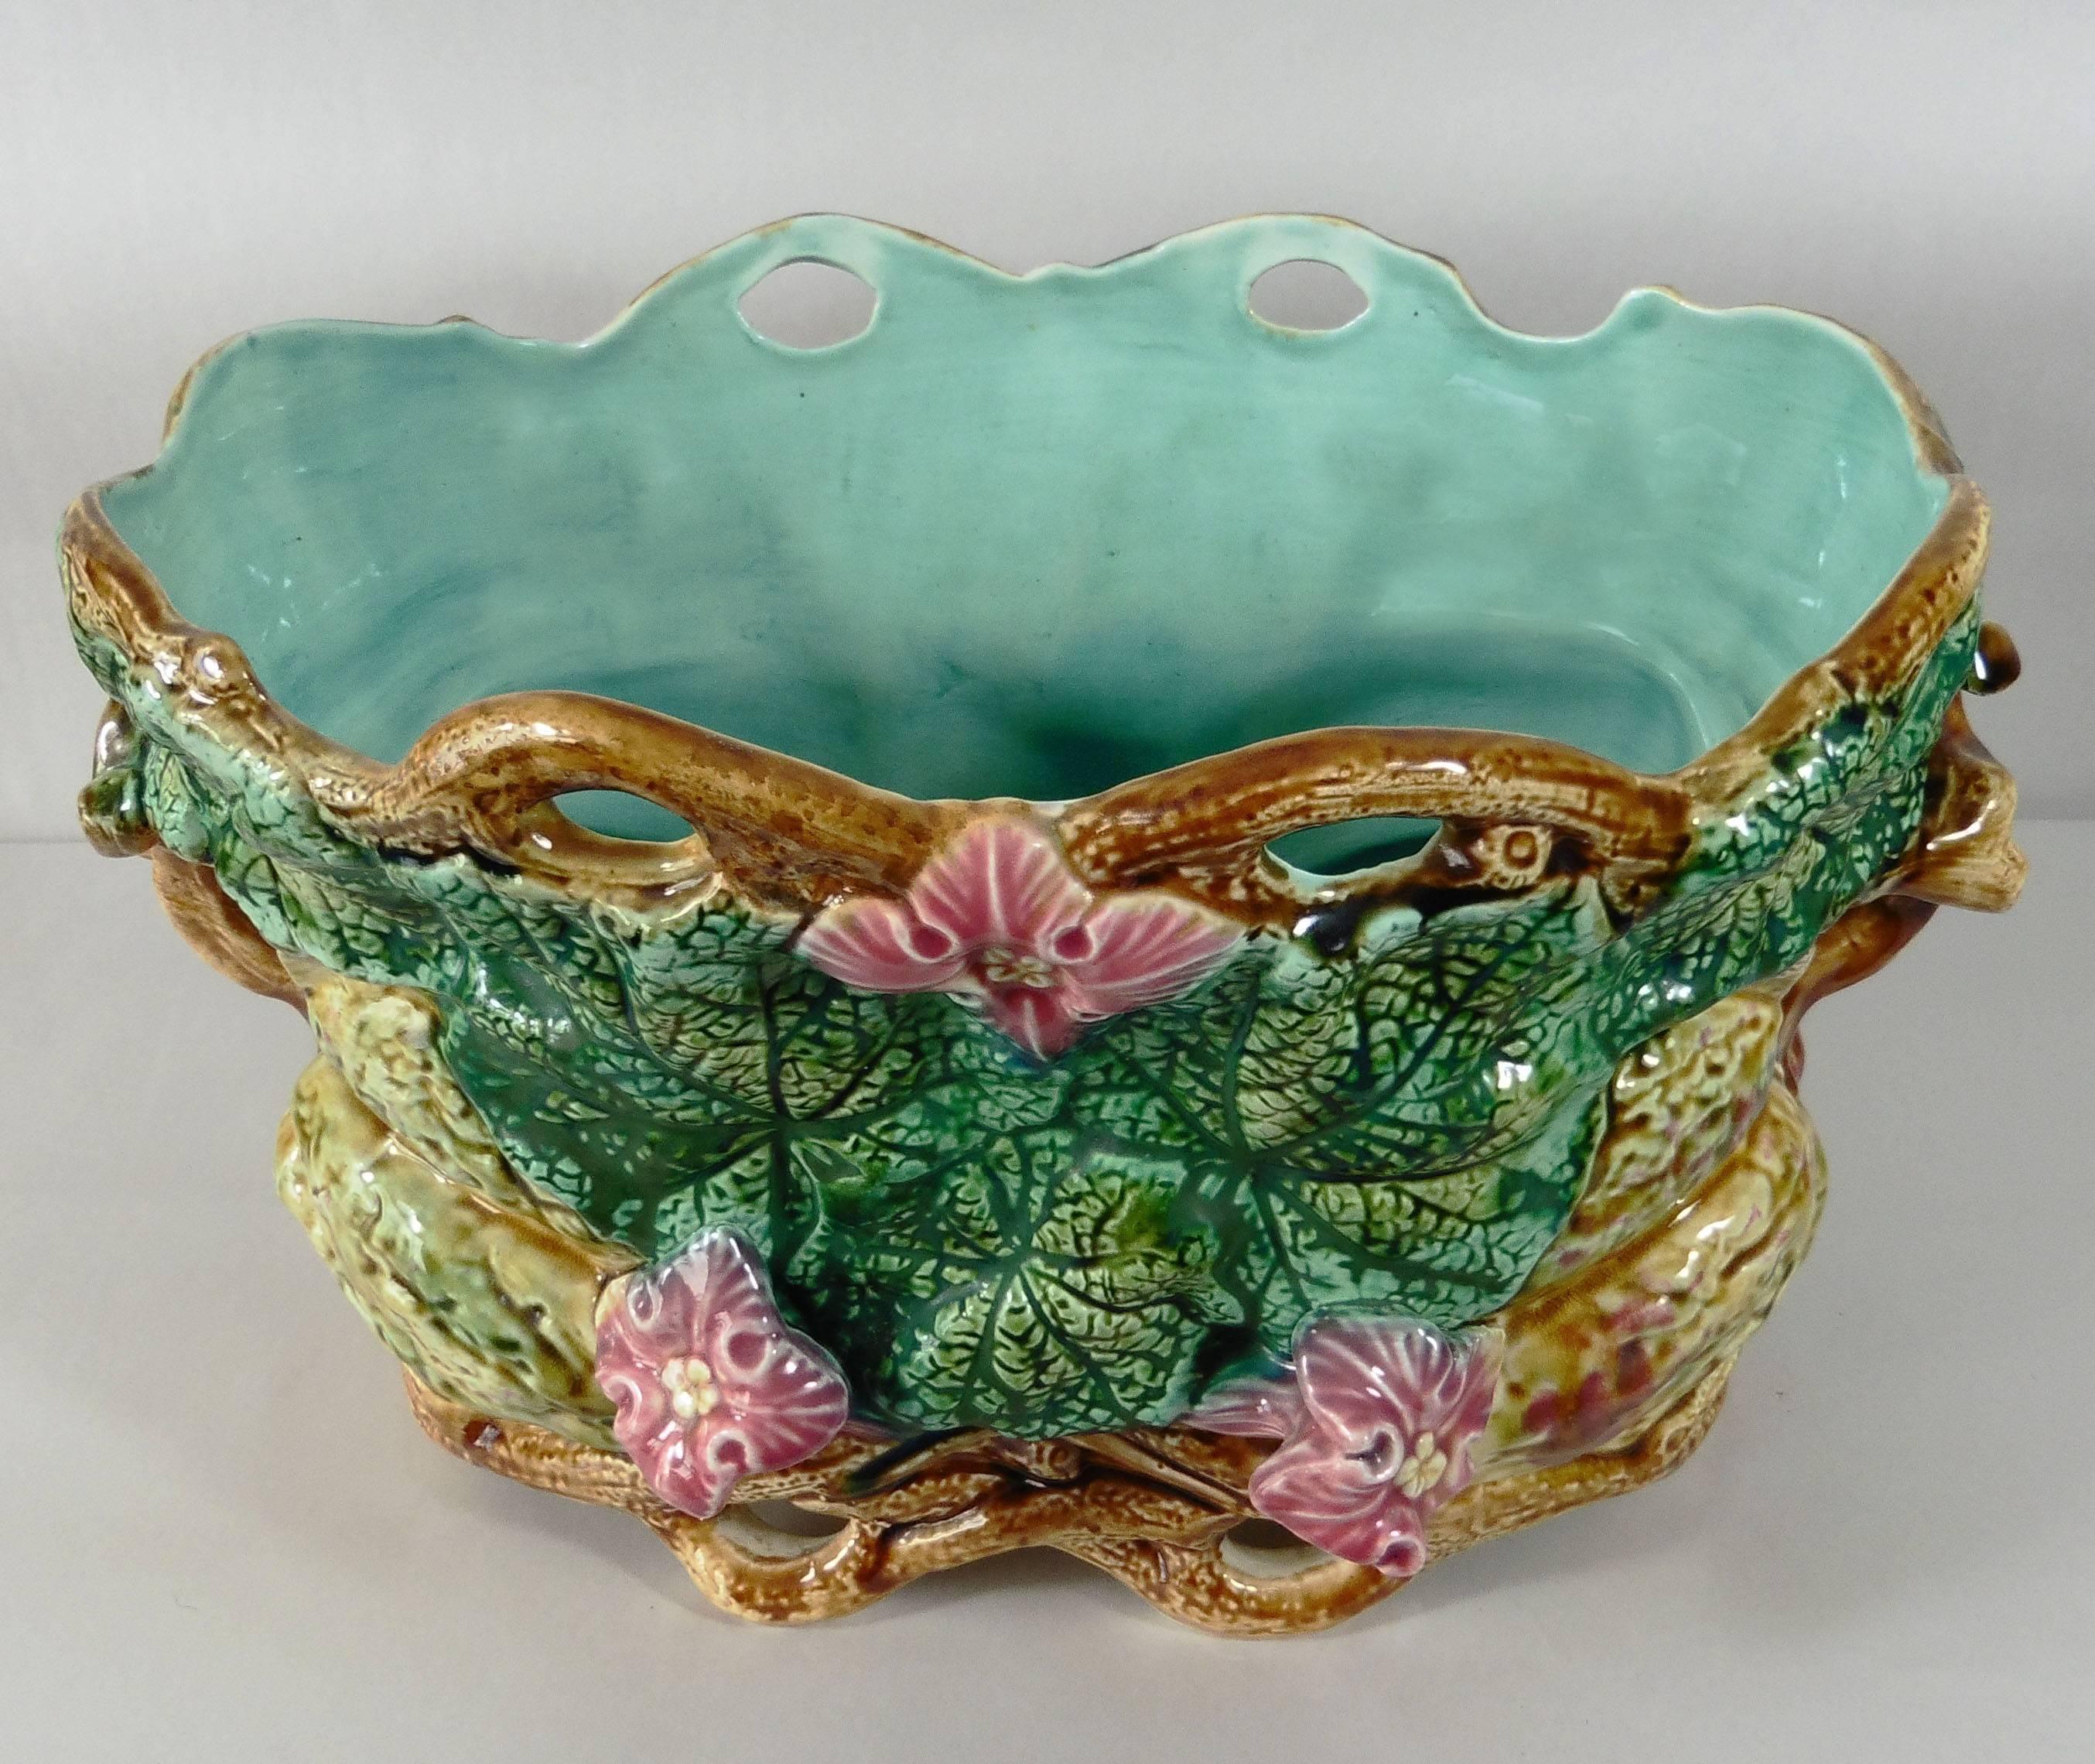 Charming 19th century Majolica pumpkin jardinière with pink flowers signed Onnaing.
The Manufacture of onnaing is inspired by the Naturalistic movement of the end of 19th century with this large jardinière in a pumpkin shape decorated with leaves,